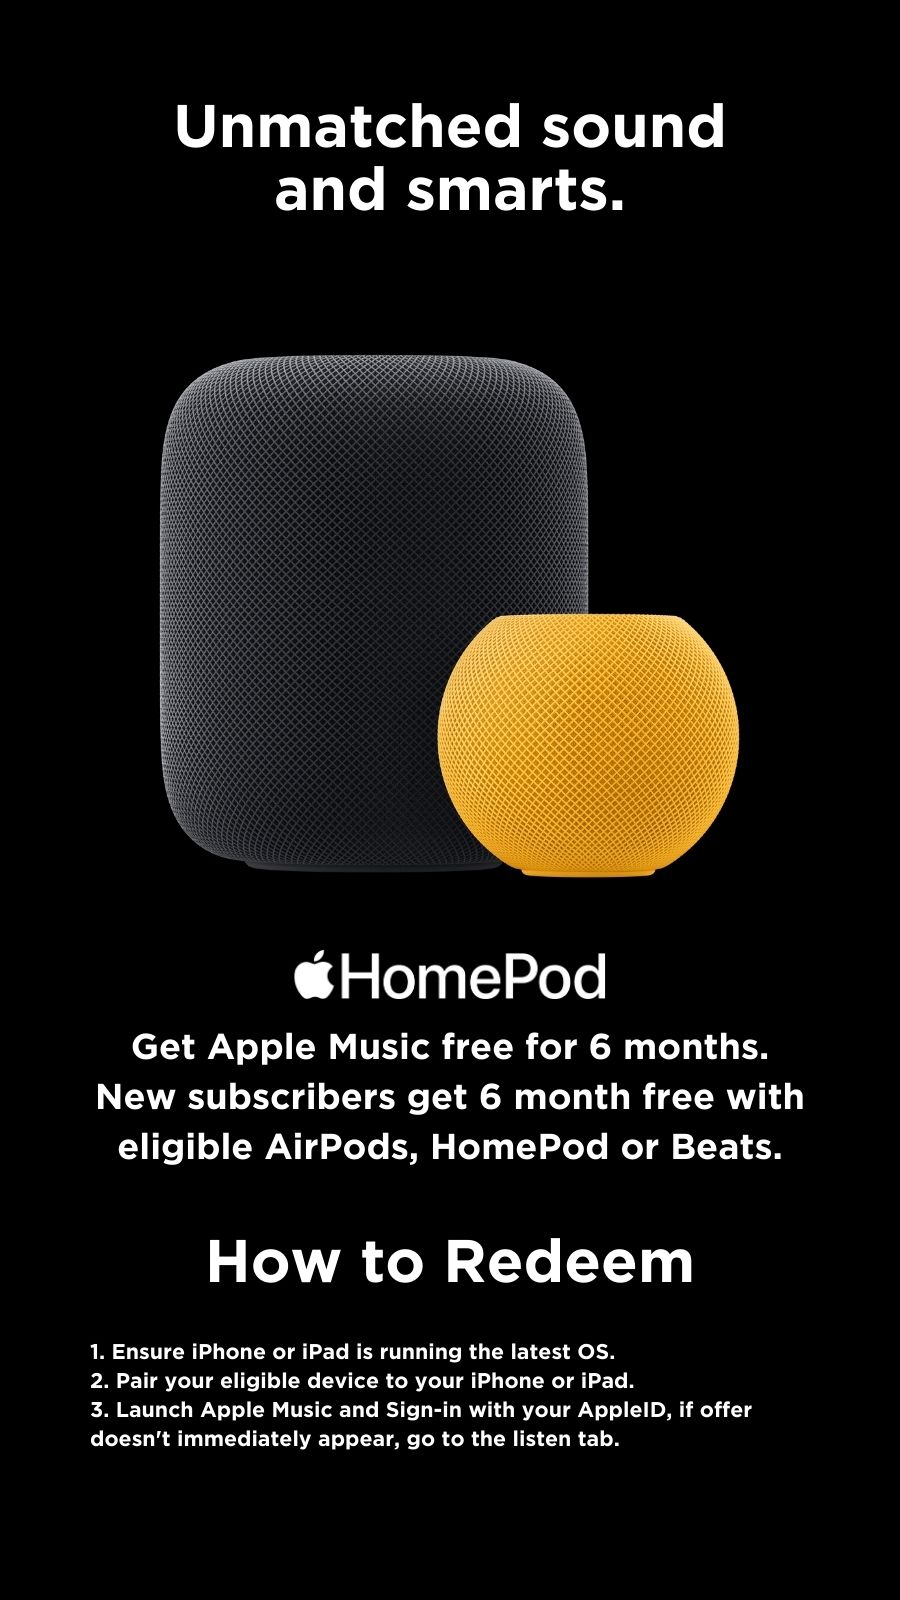 Get Apple Music free for 6 months. New Subscribers get 6 months free with eligible AirPods, HomePod or Beats